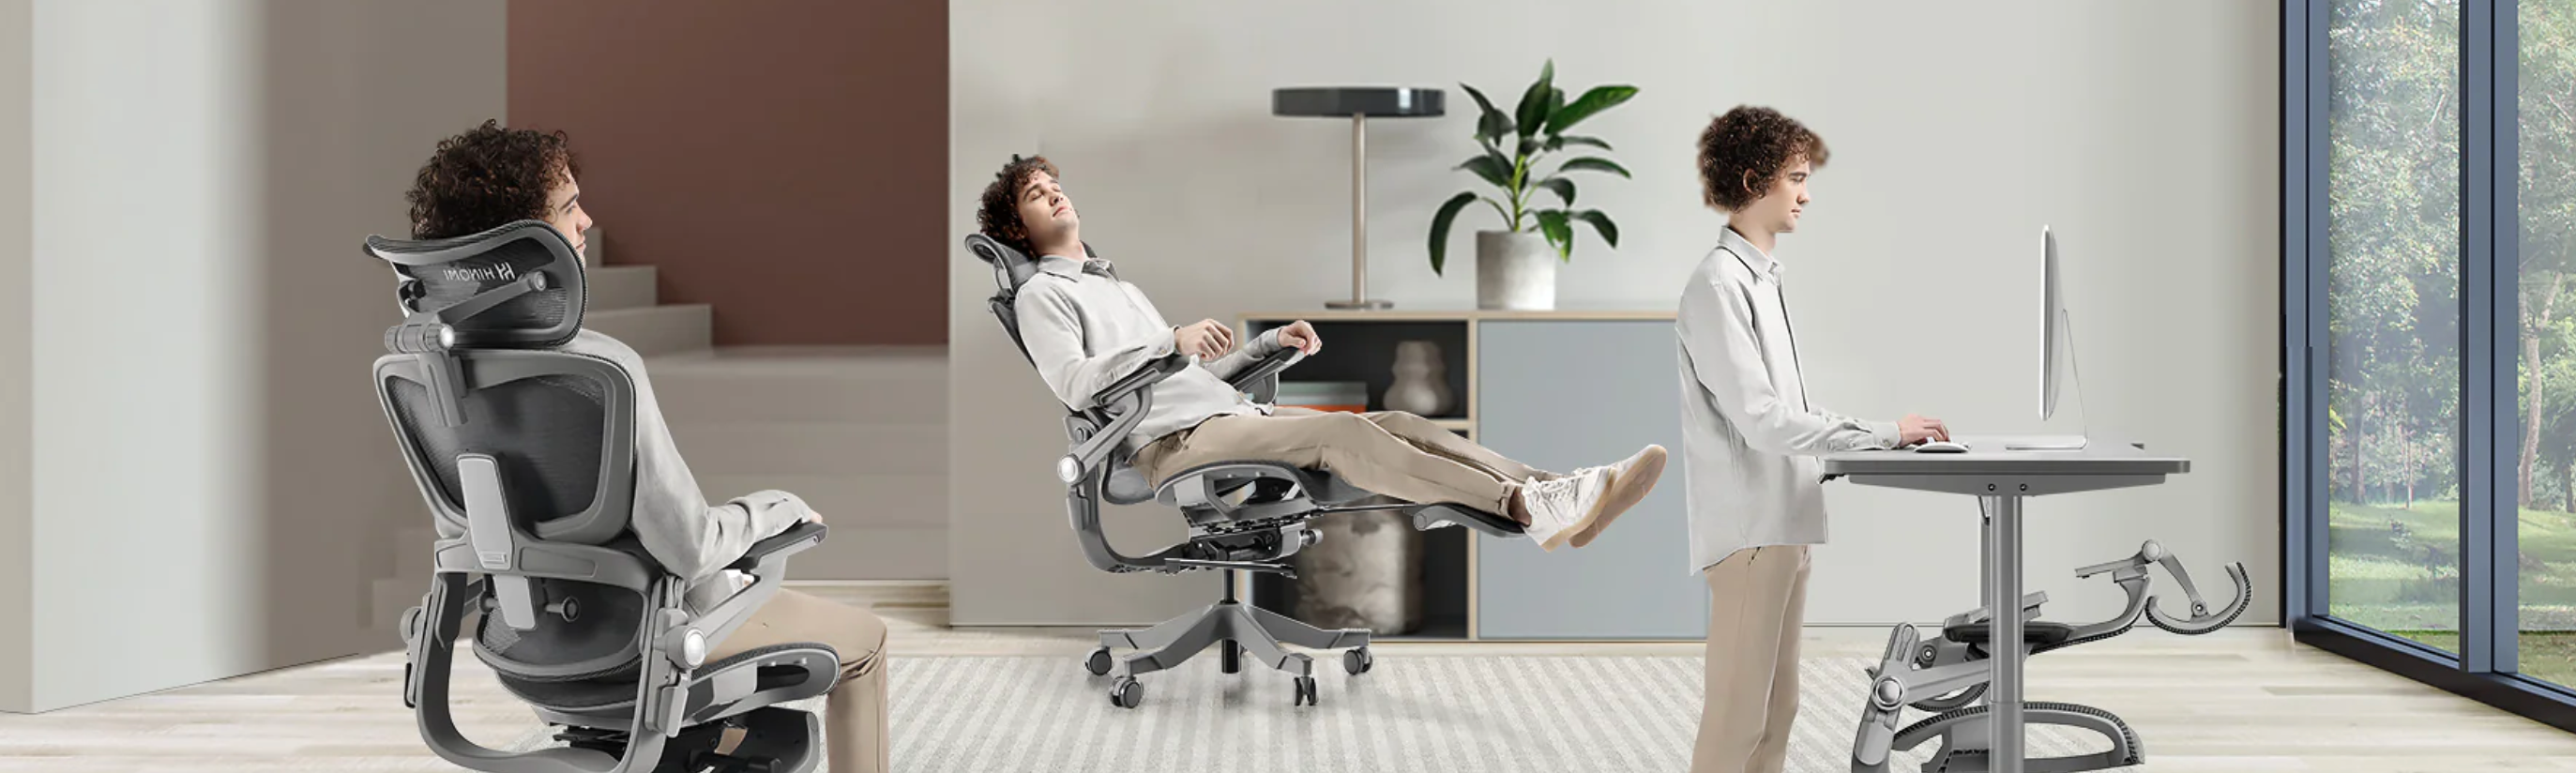 Hinomi SG - By reducing pain, discomfort, and the risk of injury, an  ergonomic chair can enhance overall health and well-being. This can help  you feel more energised, focused, and productive throughout